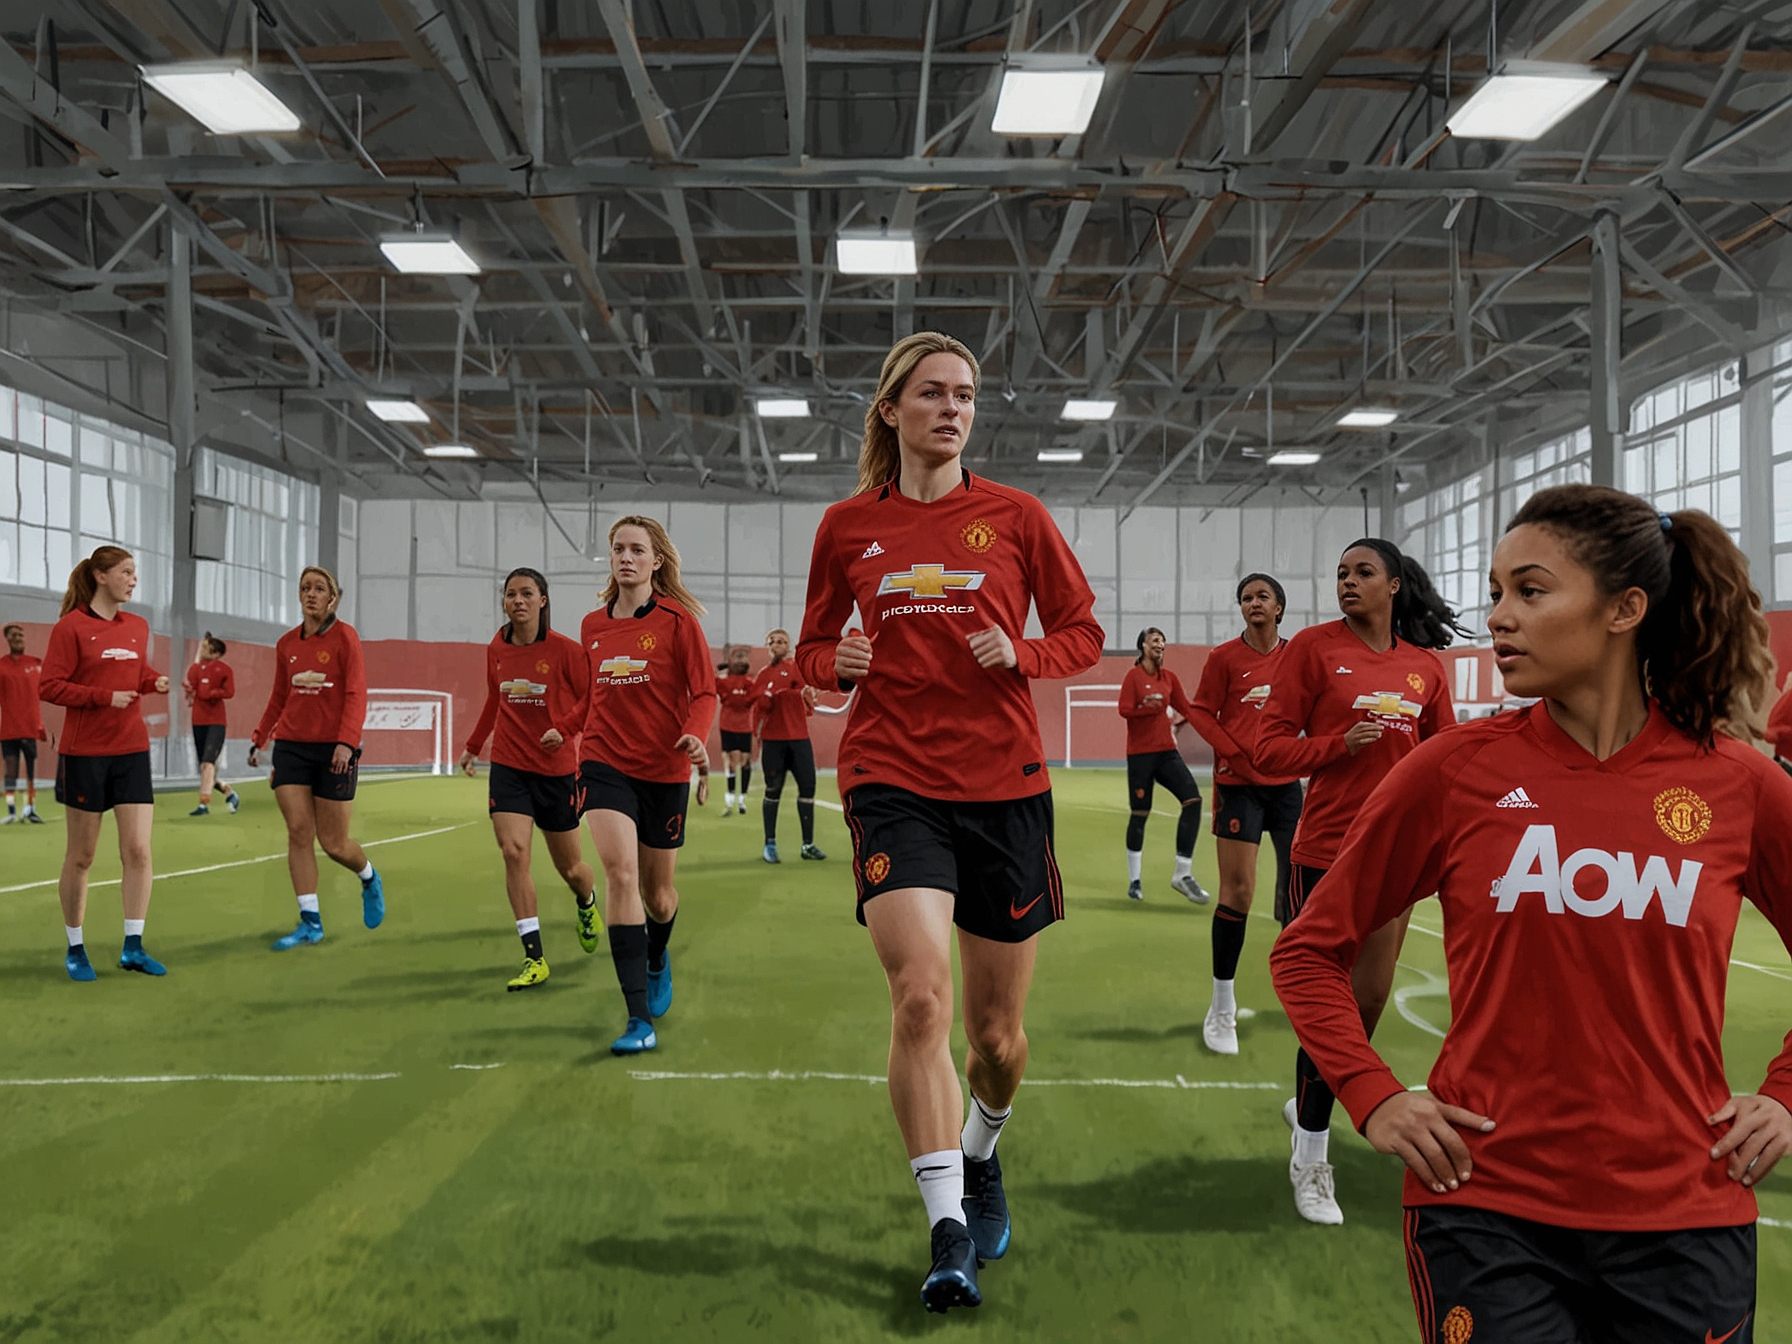 Manchester United women's team training session, illustrating the potential improvements and growth envisioned under Sir Jim Ratcliffe’s inclusive and forward-thinking strategy.